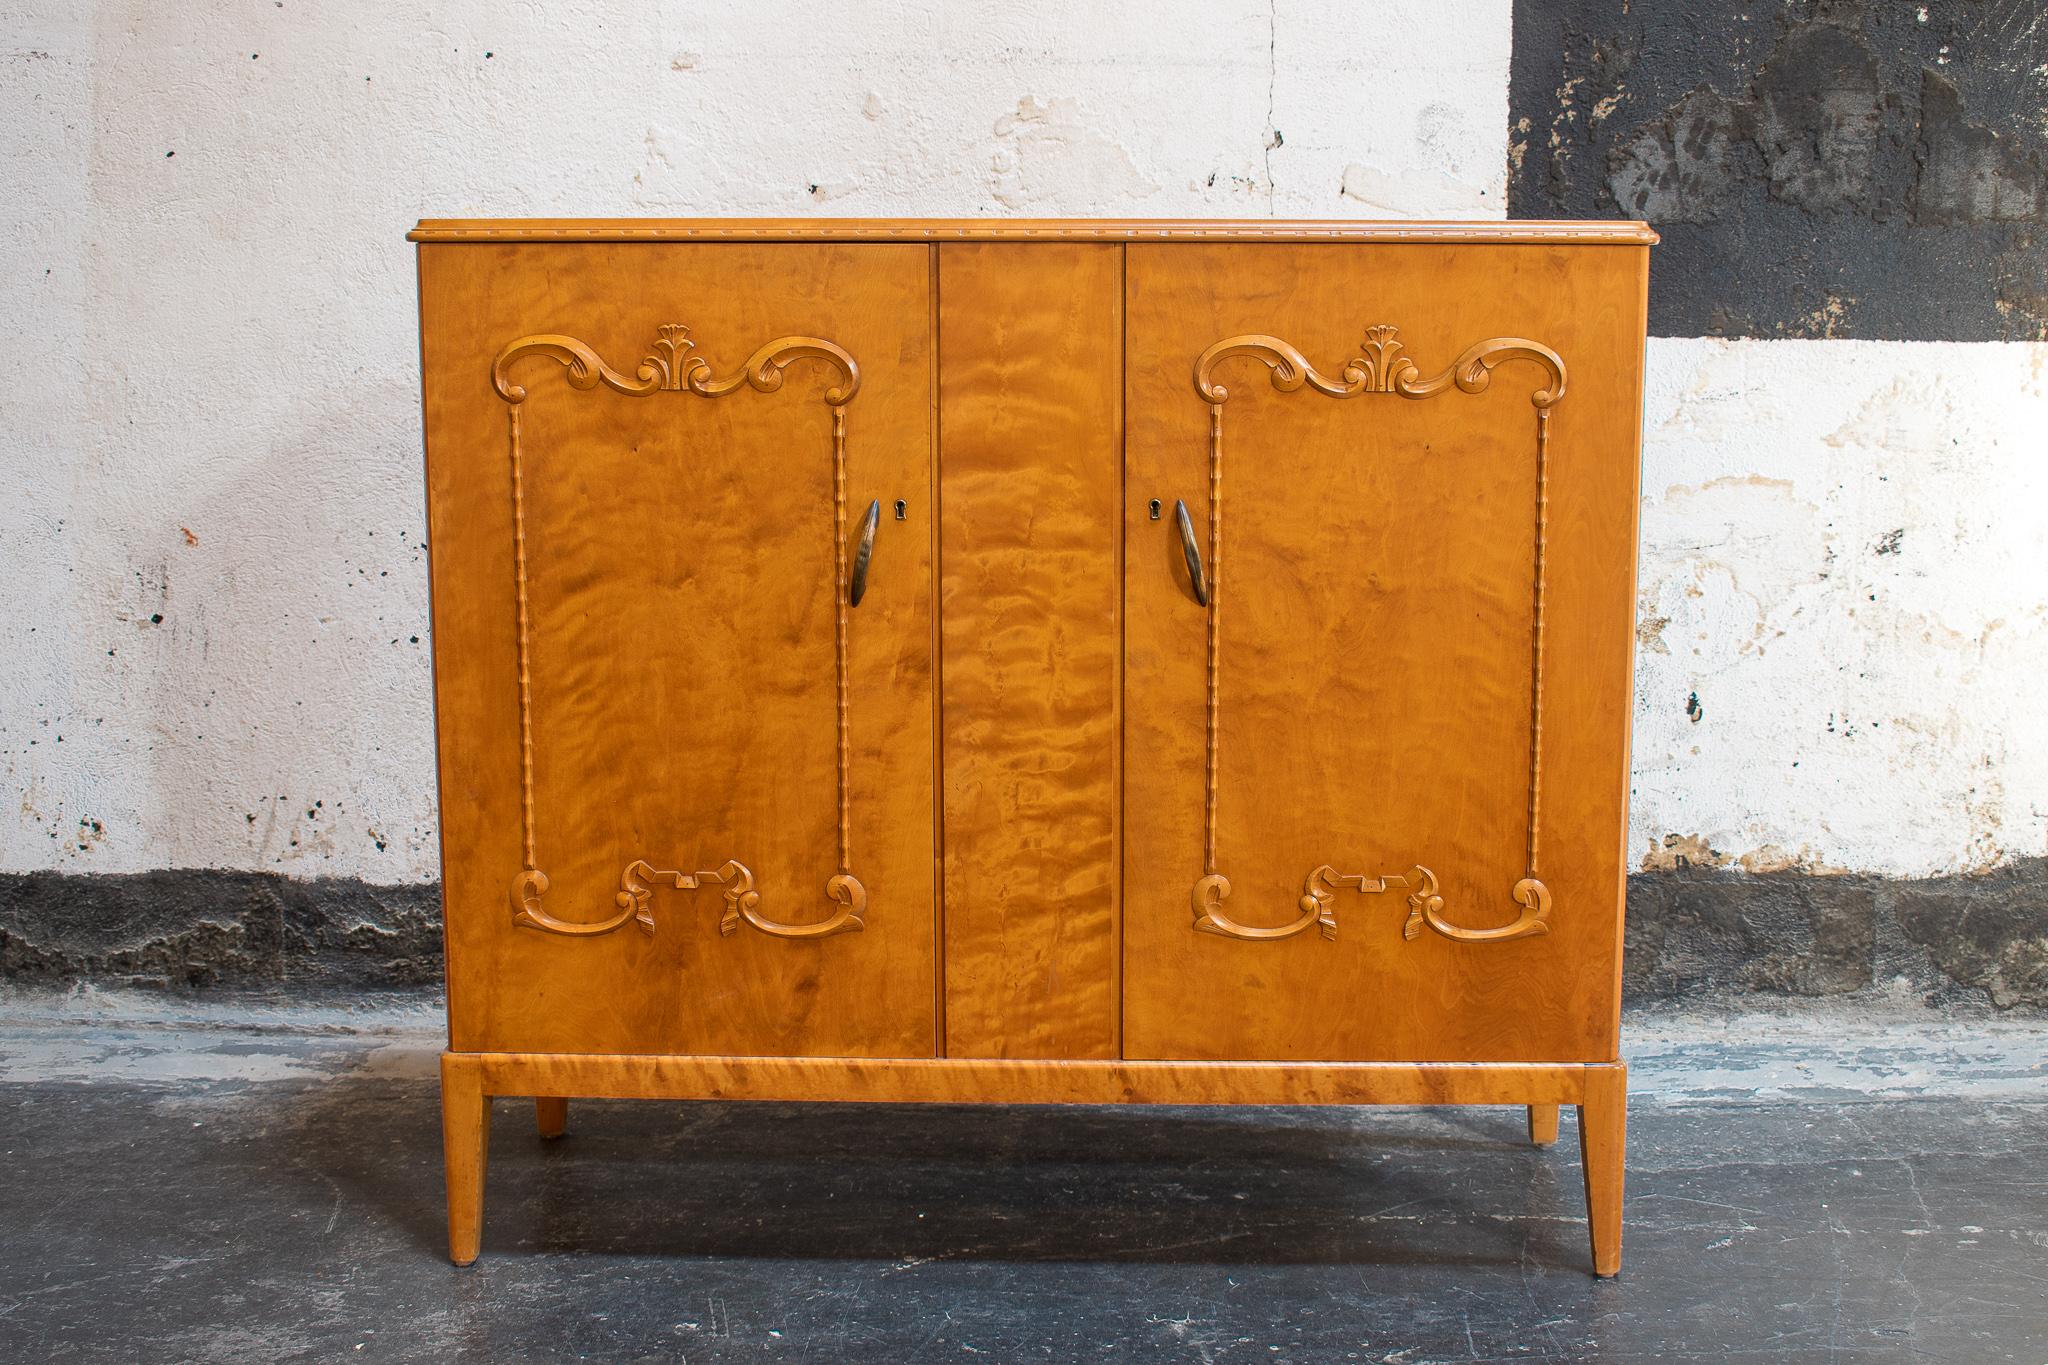 Art Moderne buffet cabinet crafted of native golden flame birch with carved details. This gorgeous wood has mellowed to a rich amber color. This storage piece opens to reveal a golden elm interior with four shelves and two drawers. Key included.